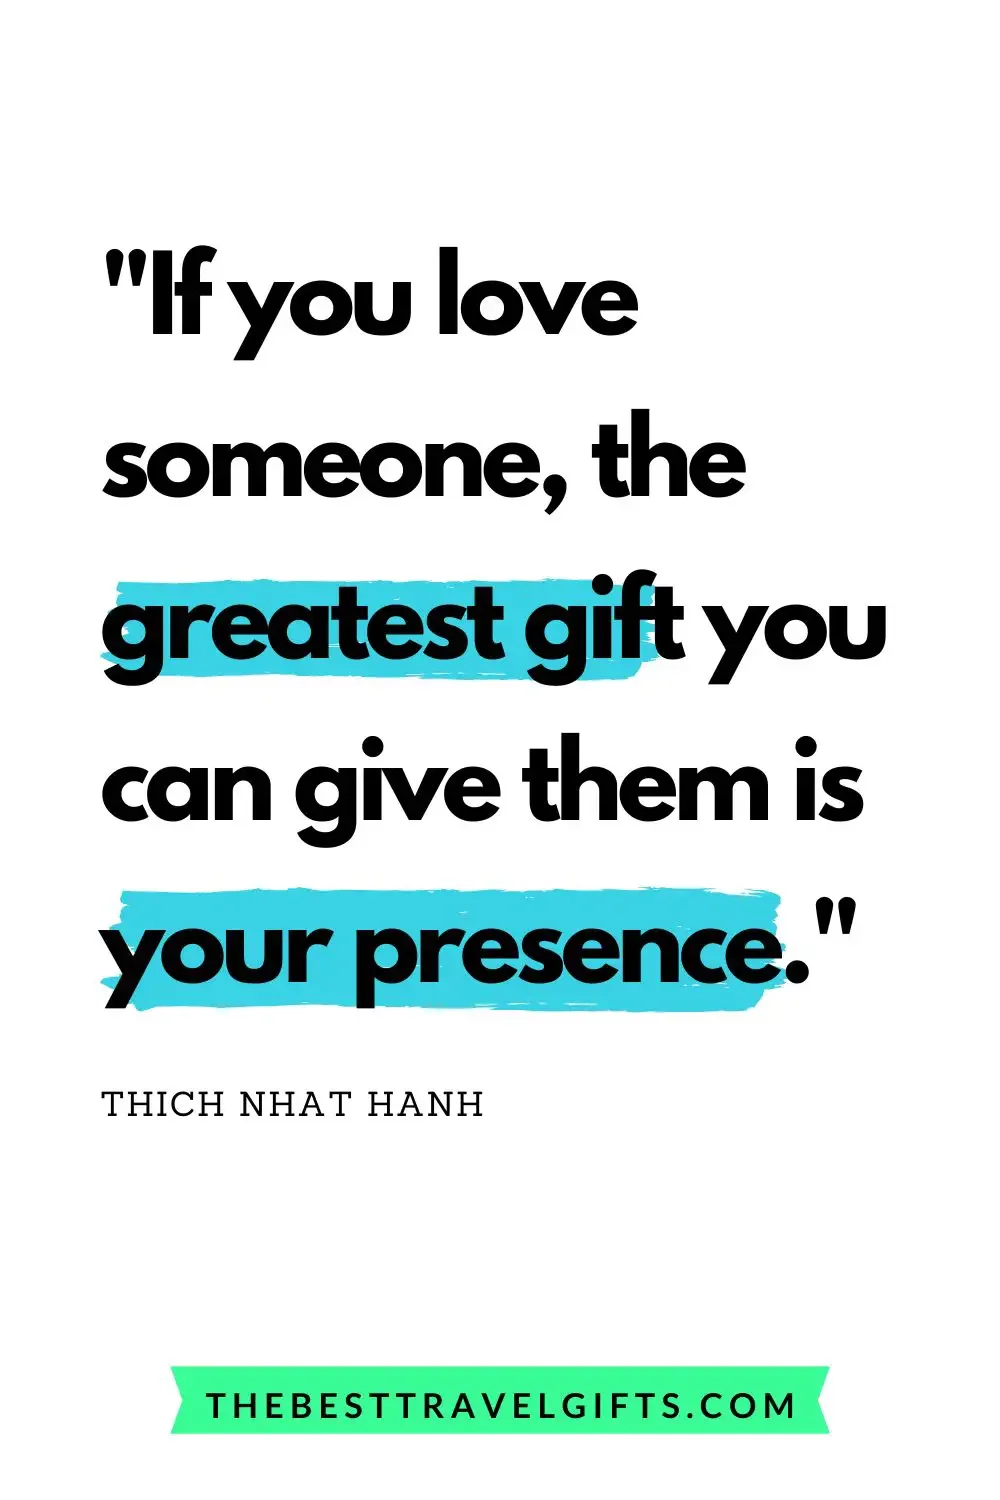 quote: if you love someone, the greatest gift you can give them is your presence